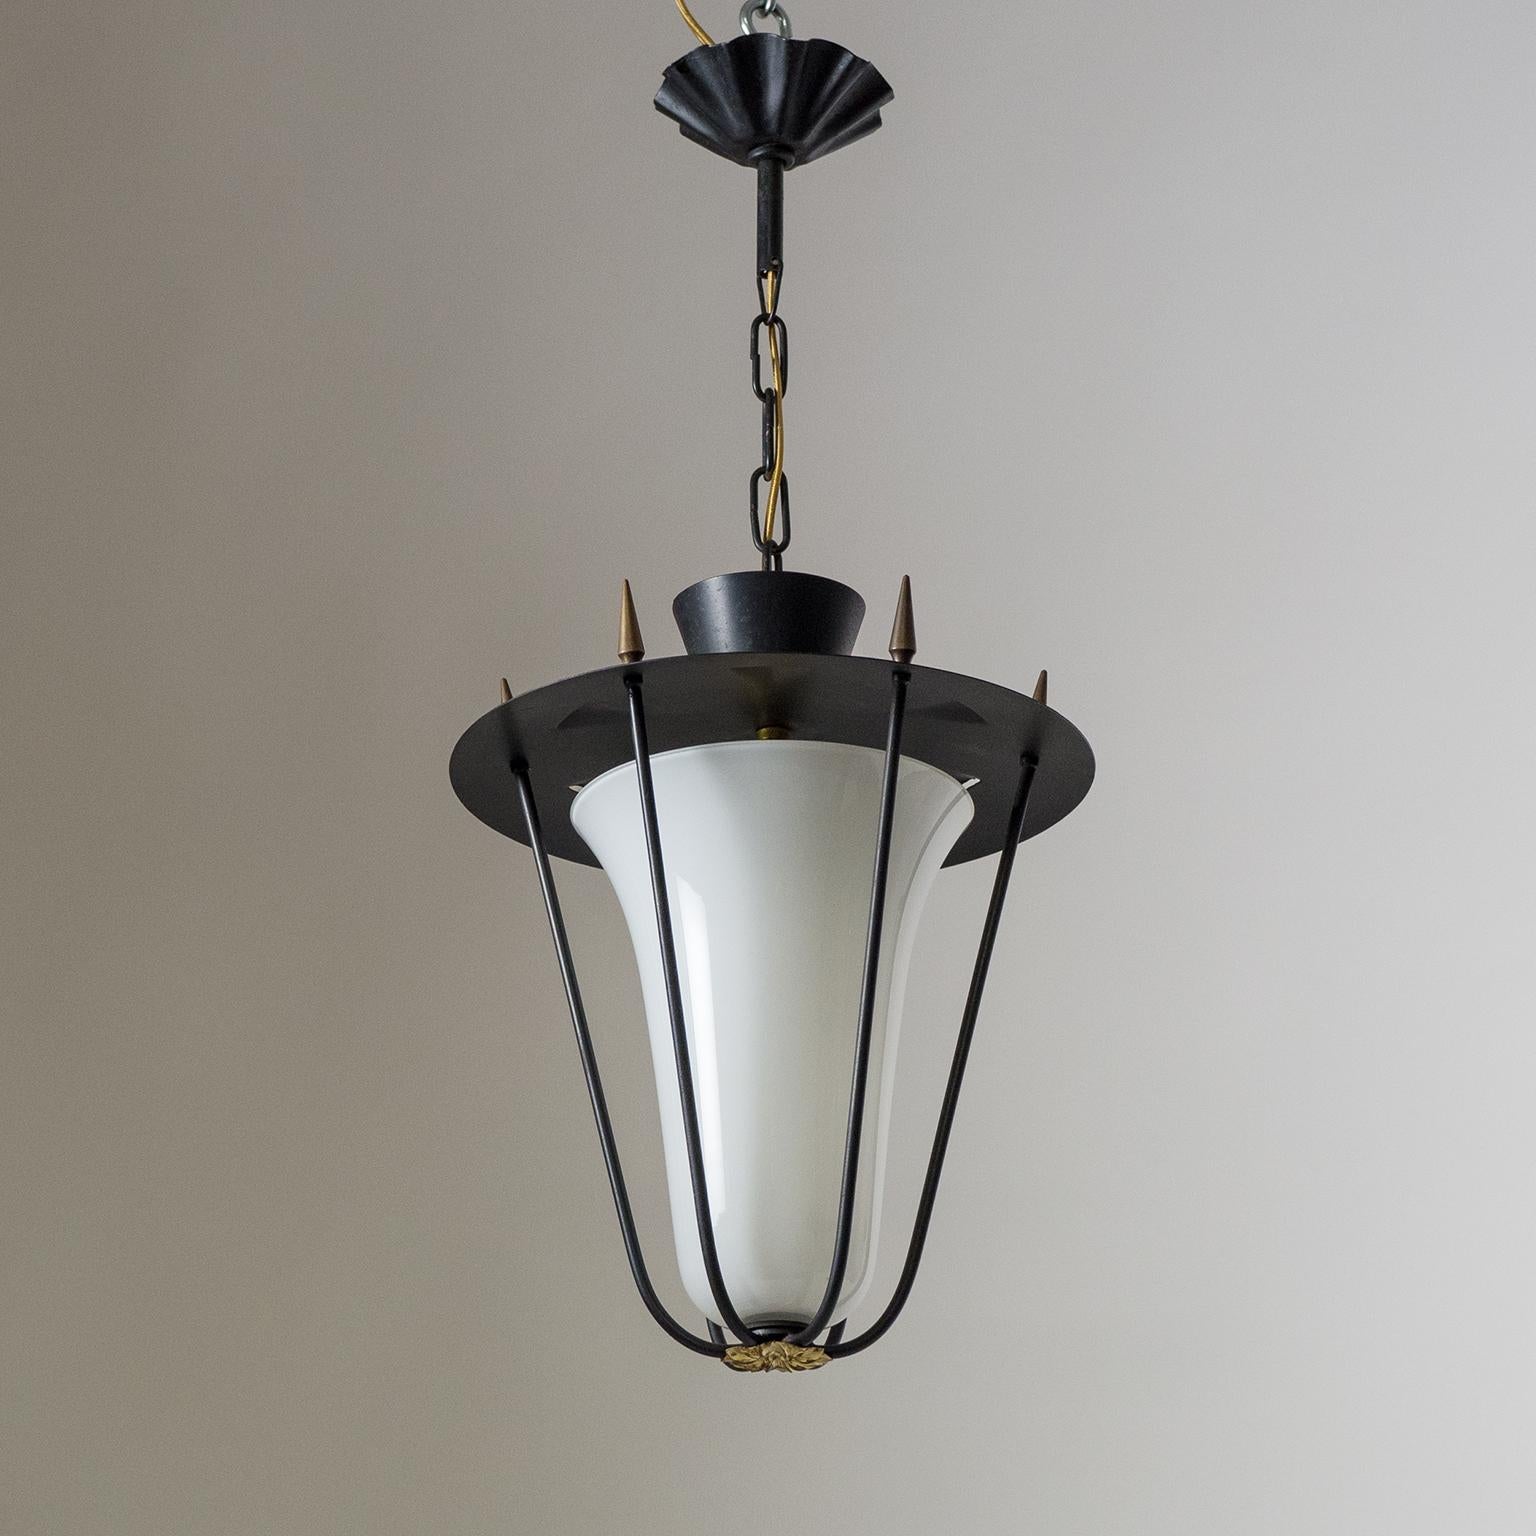 French modern lantern from the 1950s. Black lacquered hardware with a rare tapered tulip-shaped cased glass diffuser. Six spike-shaped brass knobs attach the cage body to the shade on top and a brass floral finial on the bottom provides a nice